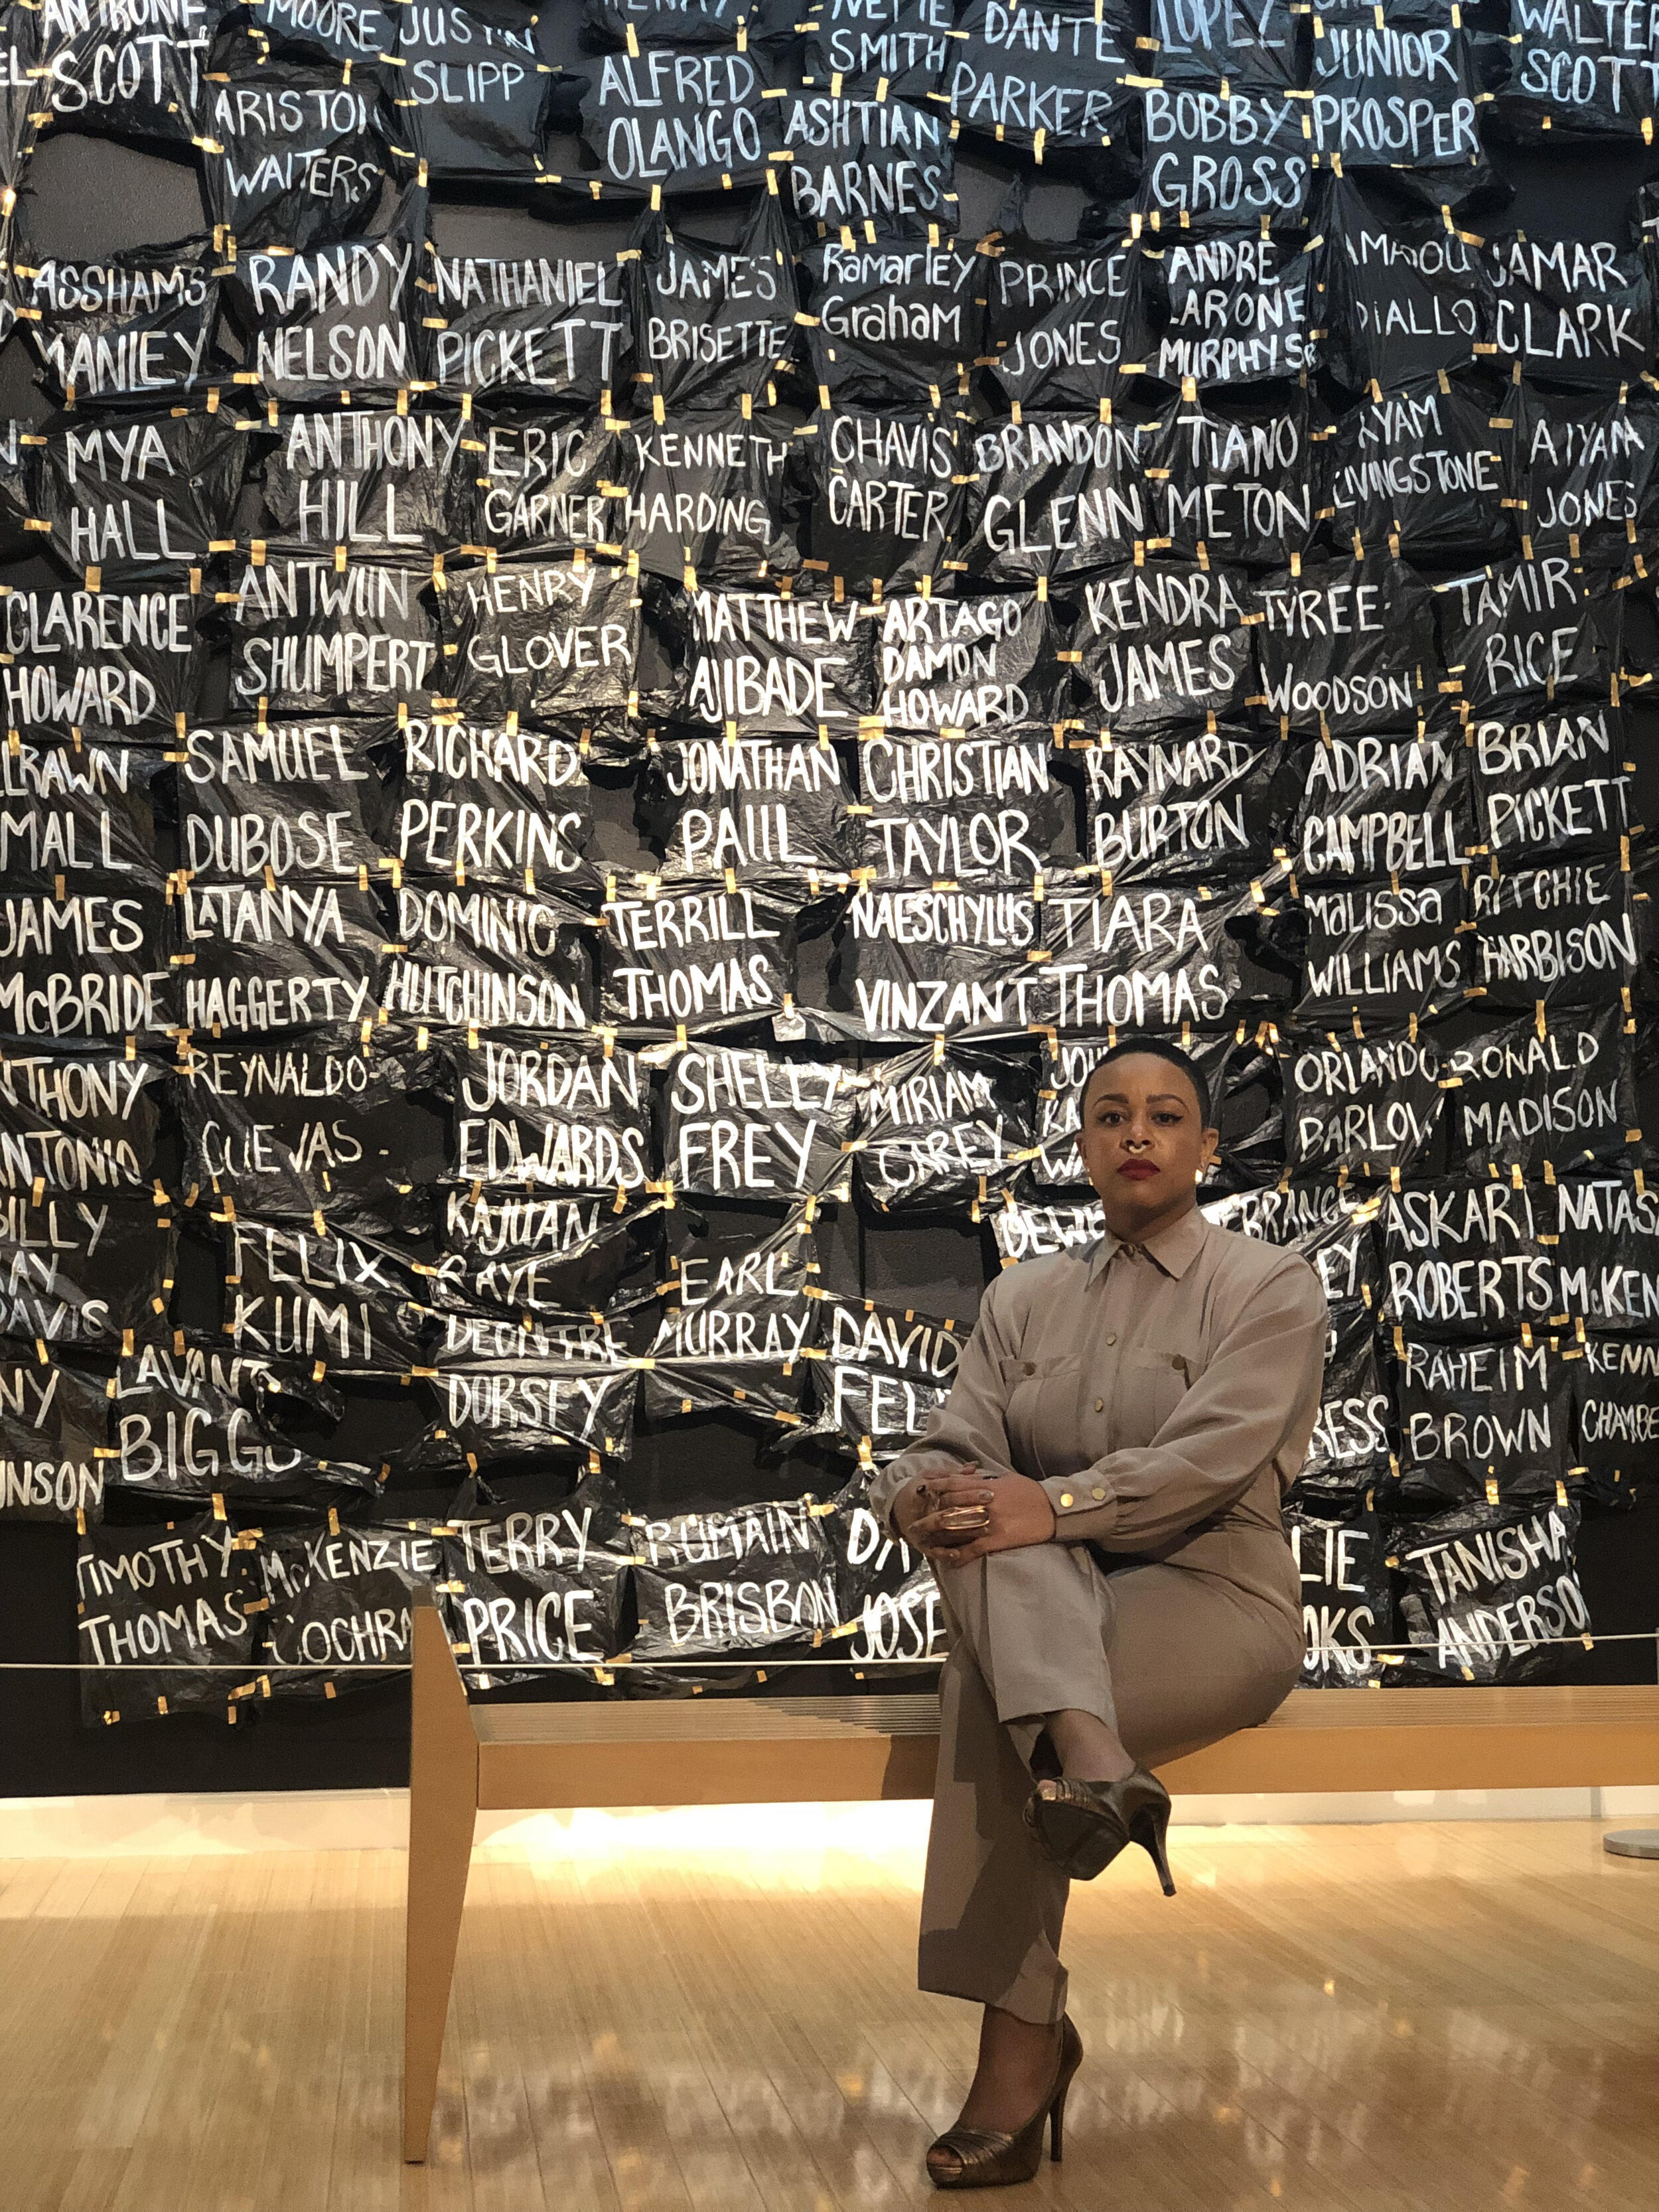  Taja Lindley,&nbsp; This Ain’t a Eulogy: A Ritual for Re-Membering | Ancestral Name Installation &nbsp;(image of site-specific installation and the artists), plastic bags, duct tape, and acrylic paint identifying the names of unarmed Black people ki